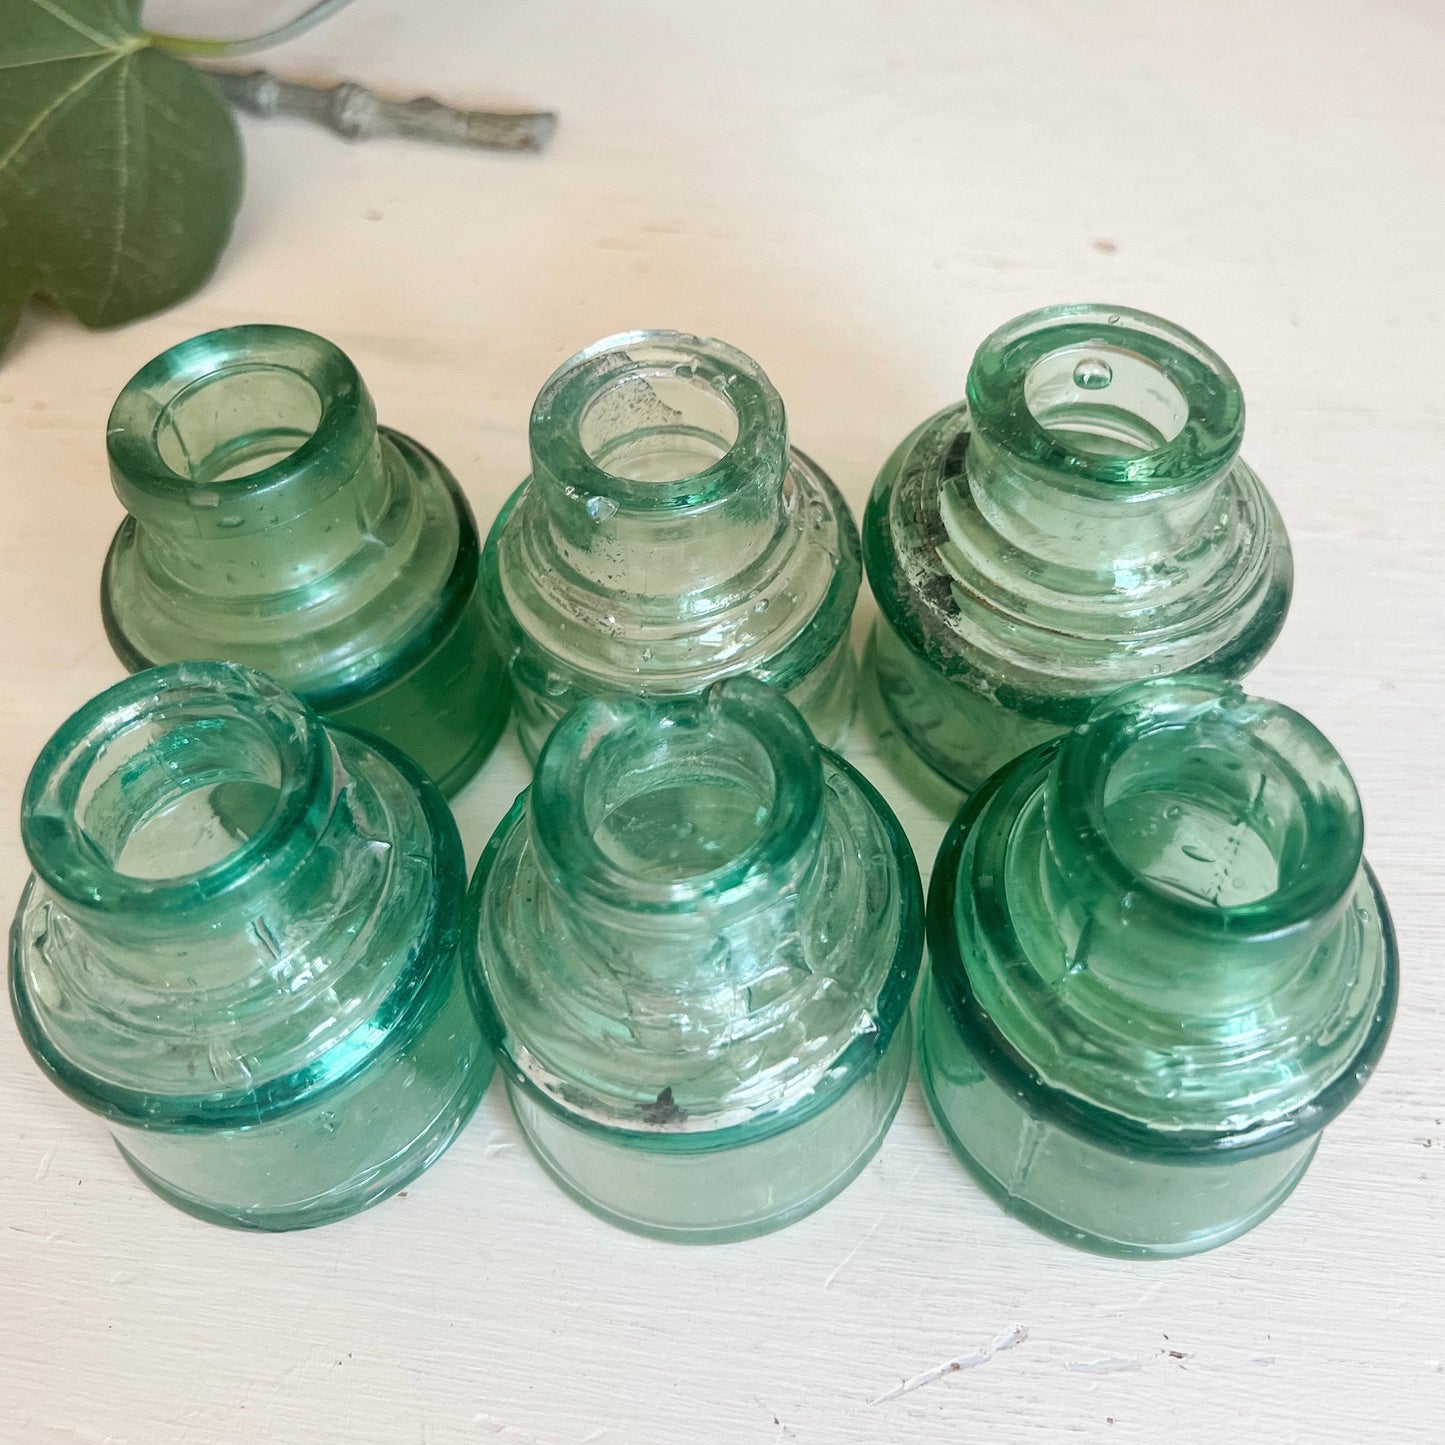 Collection of Antique English Aqua Glass Inkwells (set of 6)